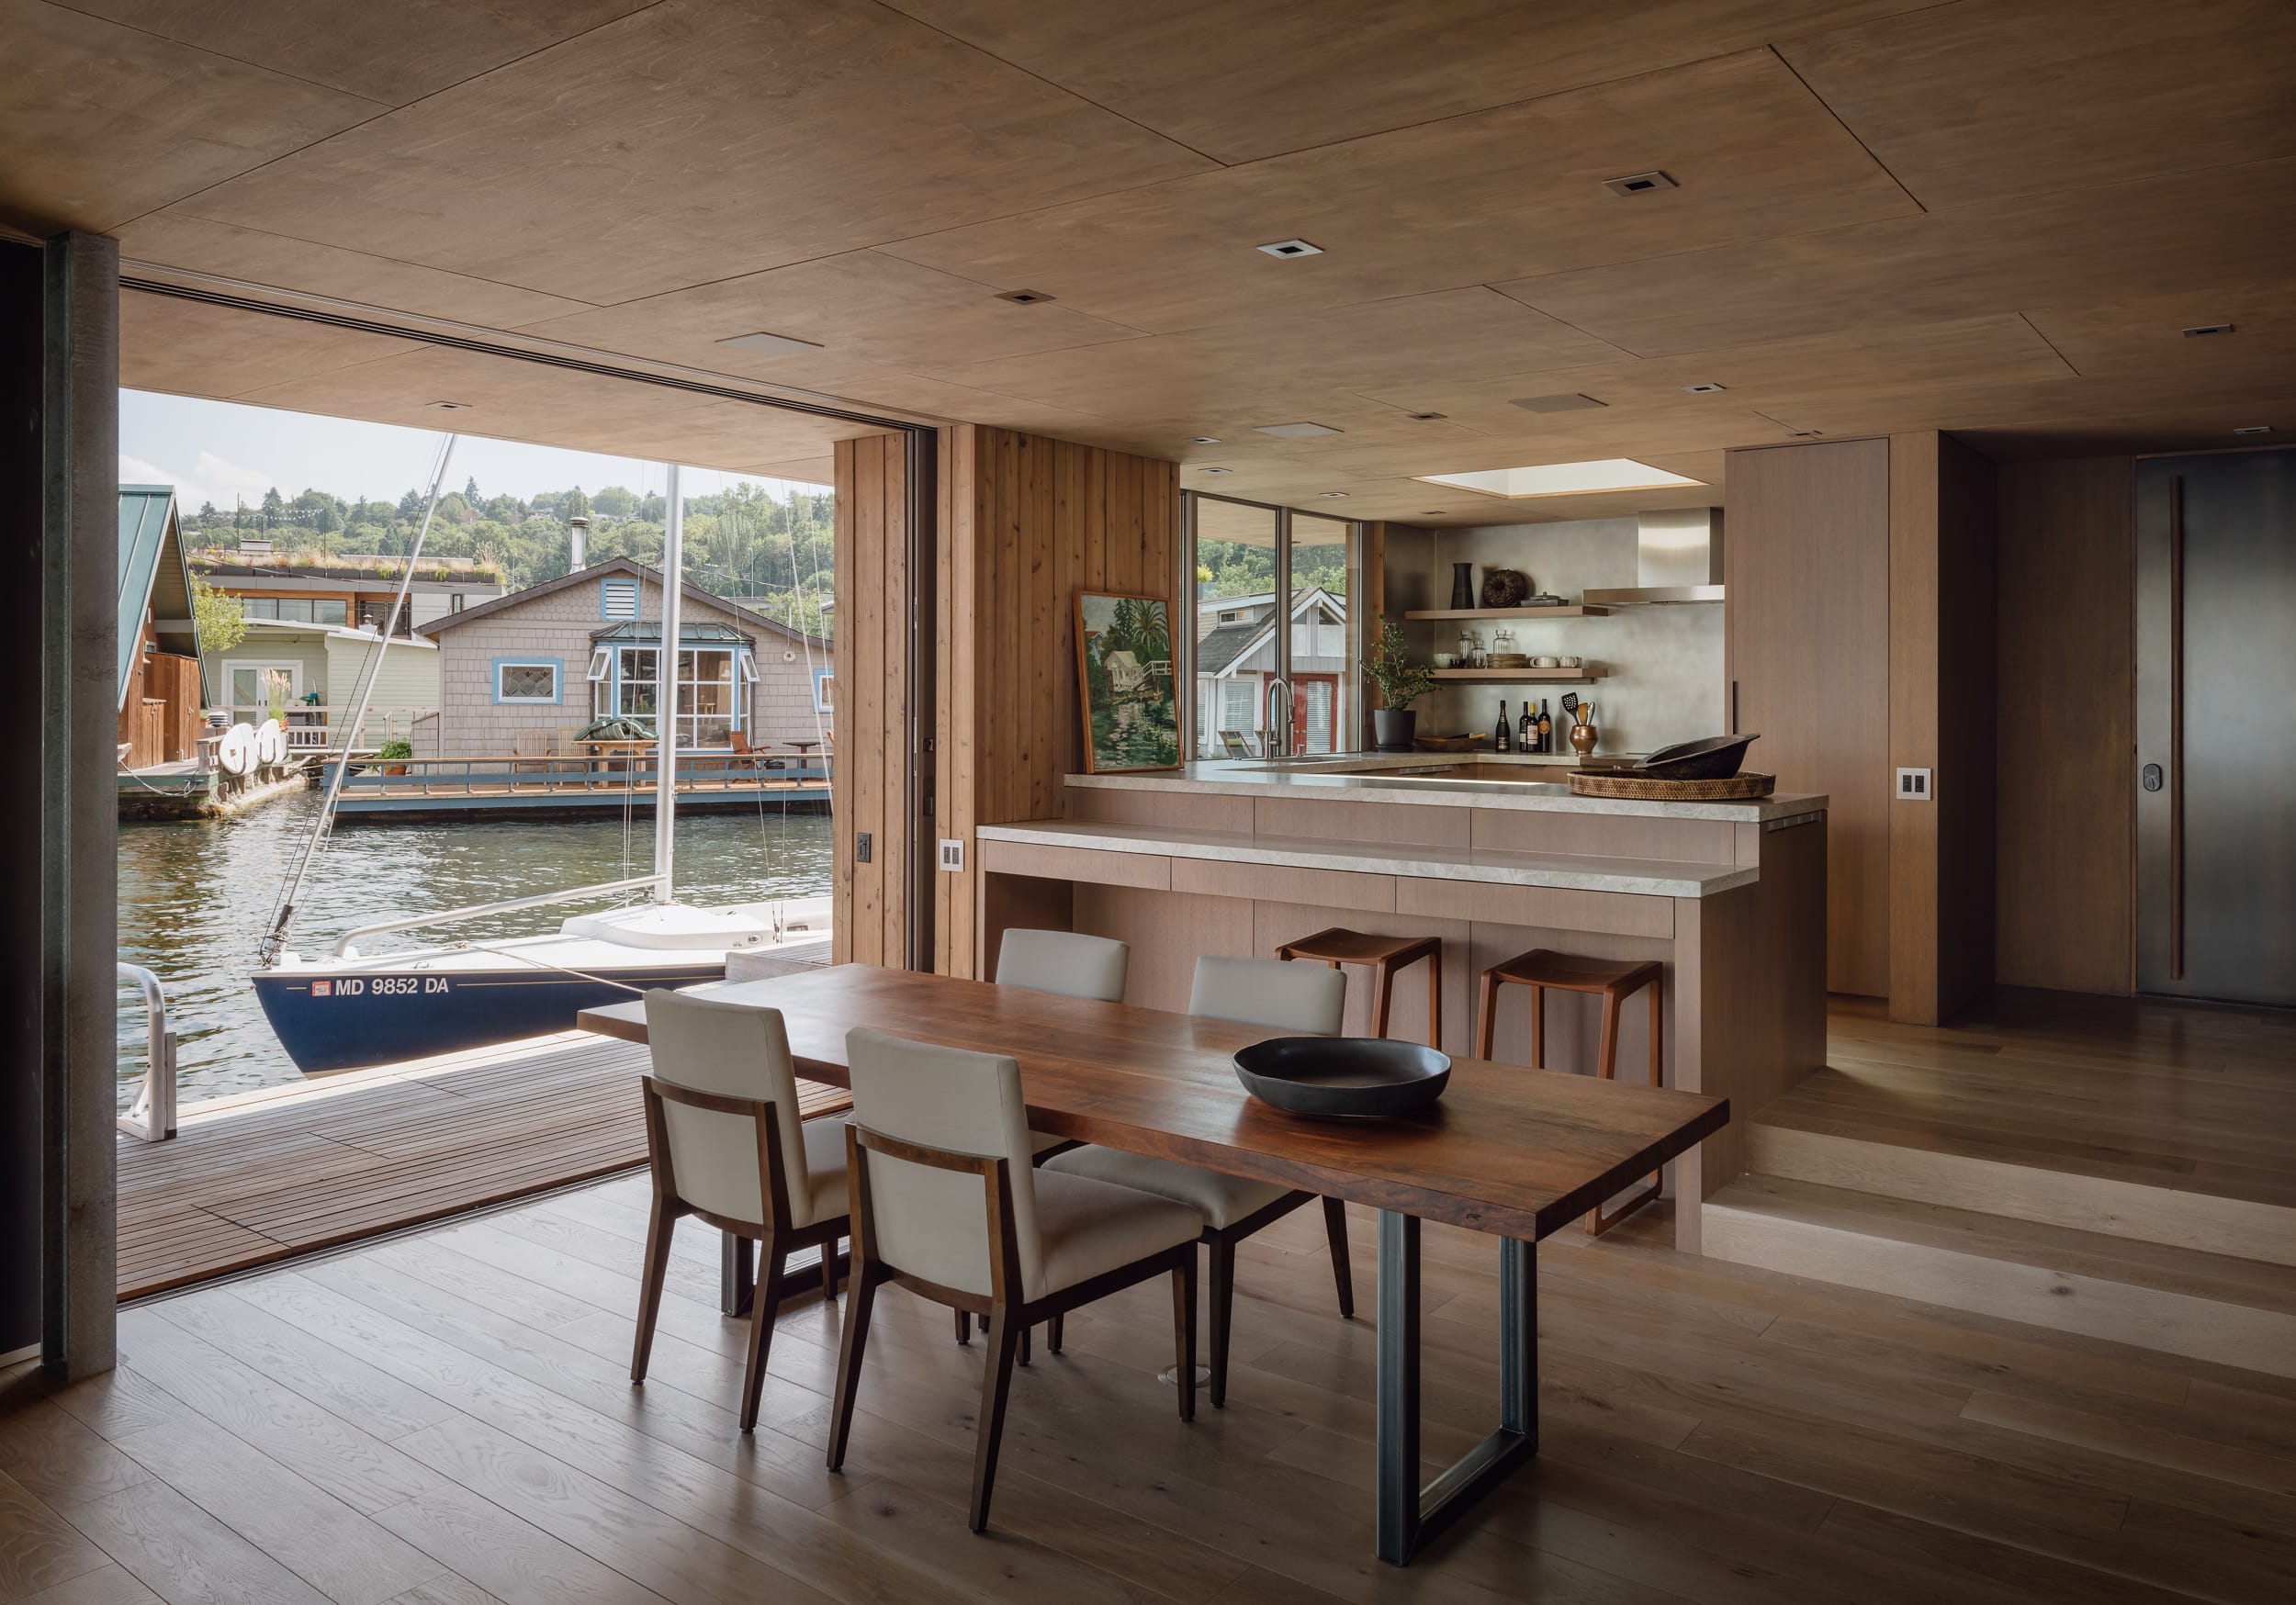 A modern home with a kitchen and dining room, offering a stunning view of the water.